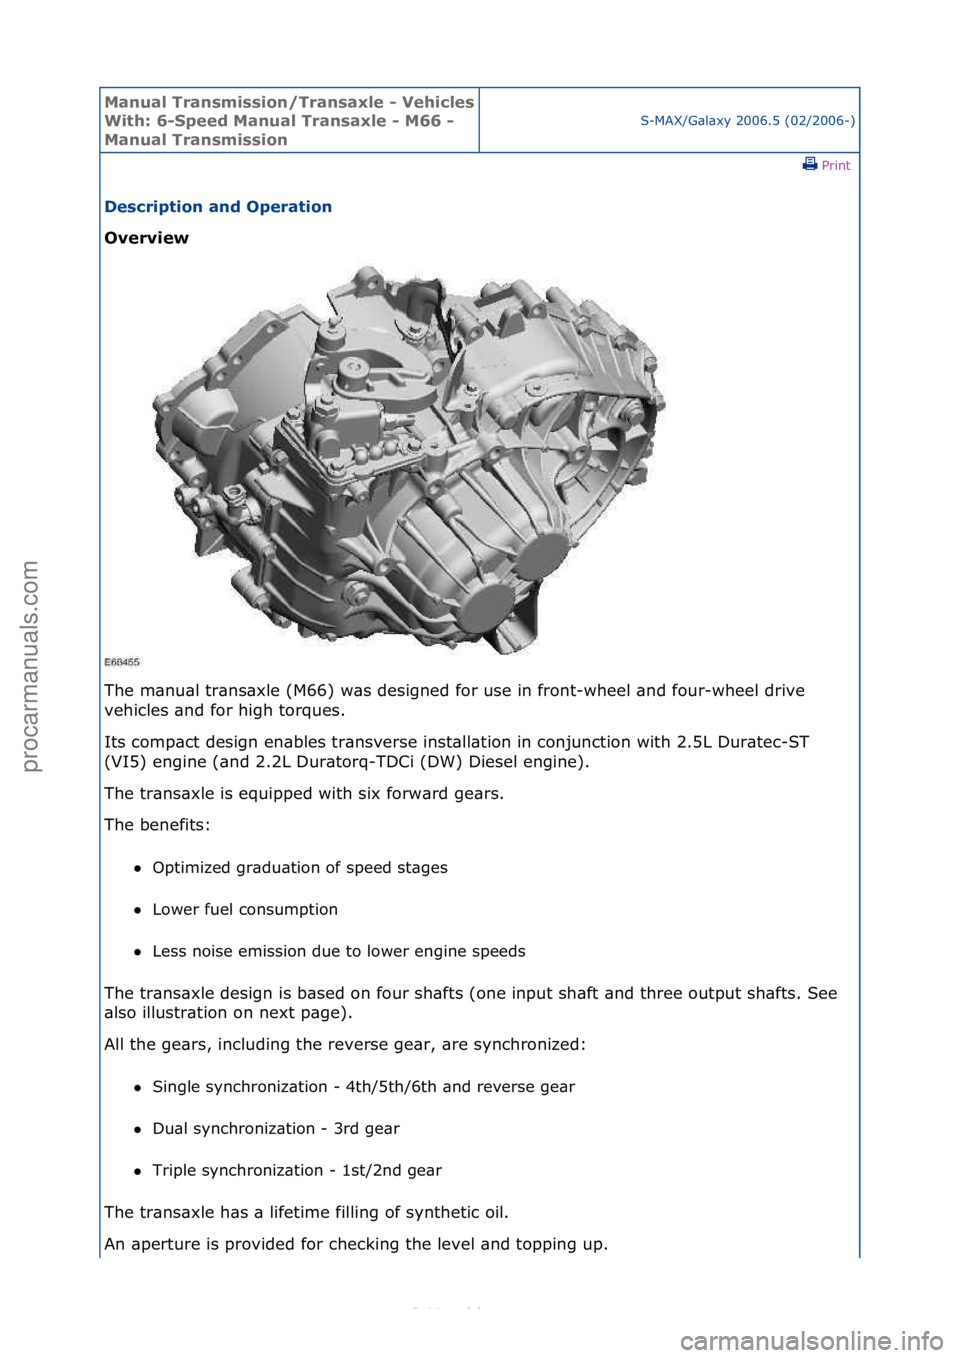 FORD S-MAX 2006  Service Repair Manual Manual T\bansmissi\fn/T\bansaxle - Vehicles 
With: 6-Speed Manual T\bansaxle - M66 - 
Manual T\bansmissi\fnS-MAX/G\bl\bxy\f2006.5\f(02/2006-)\fPrint \f
Desc\bipti\fn and Ope\bati\fn 
Ove\bview 
Th

e\